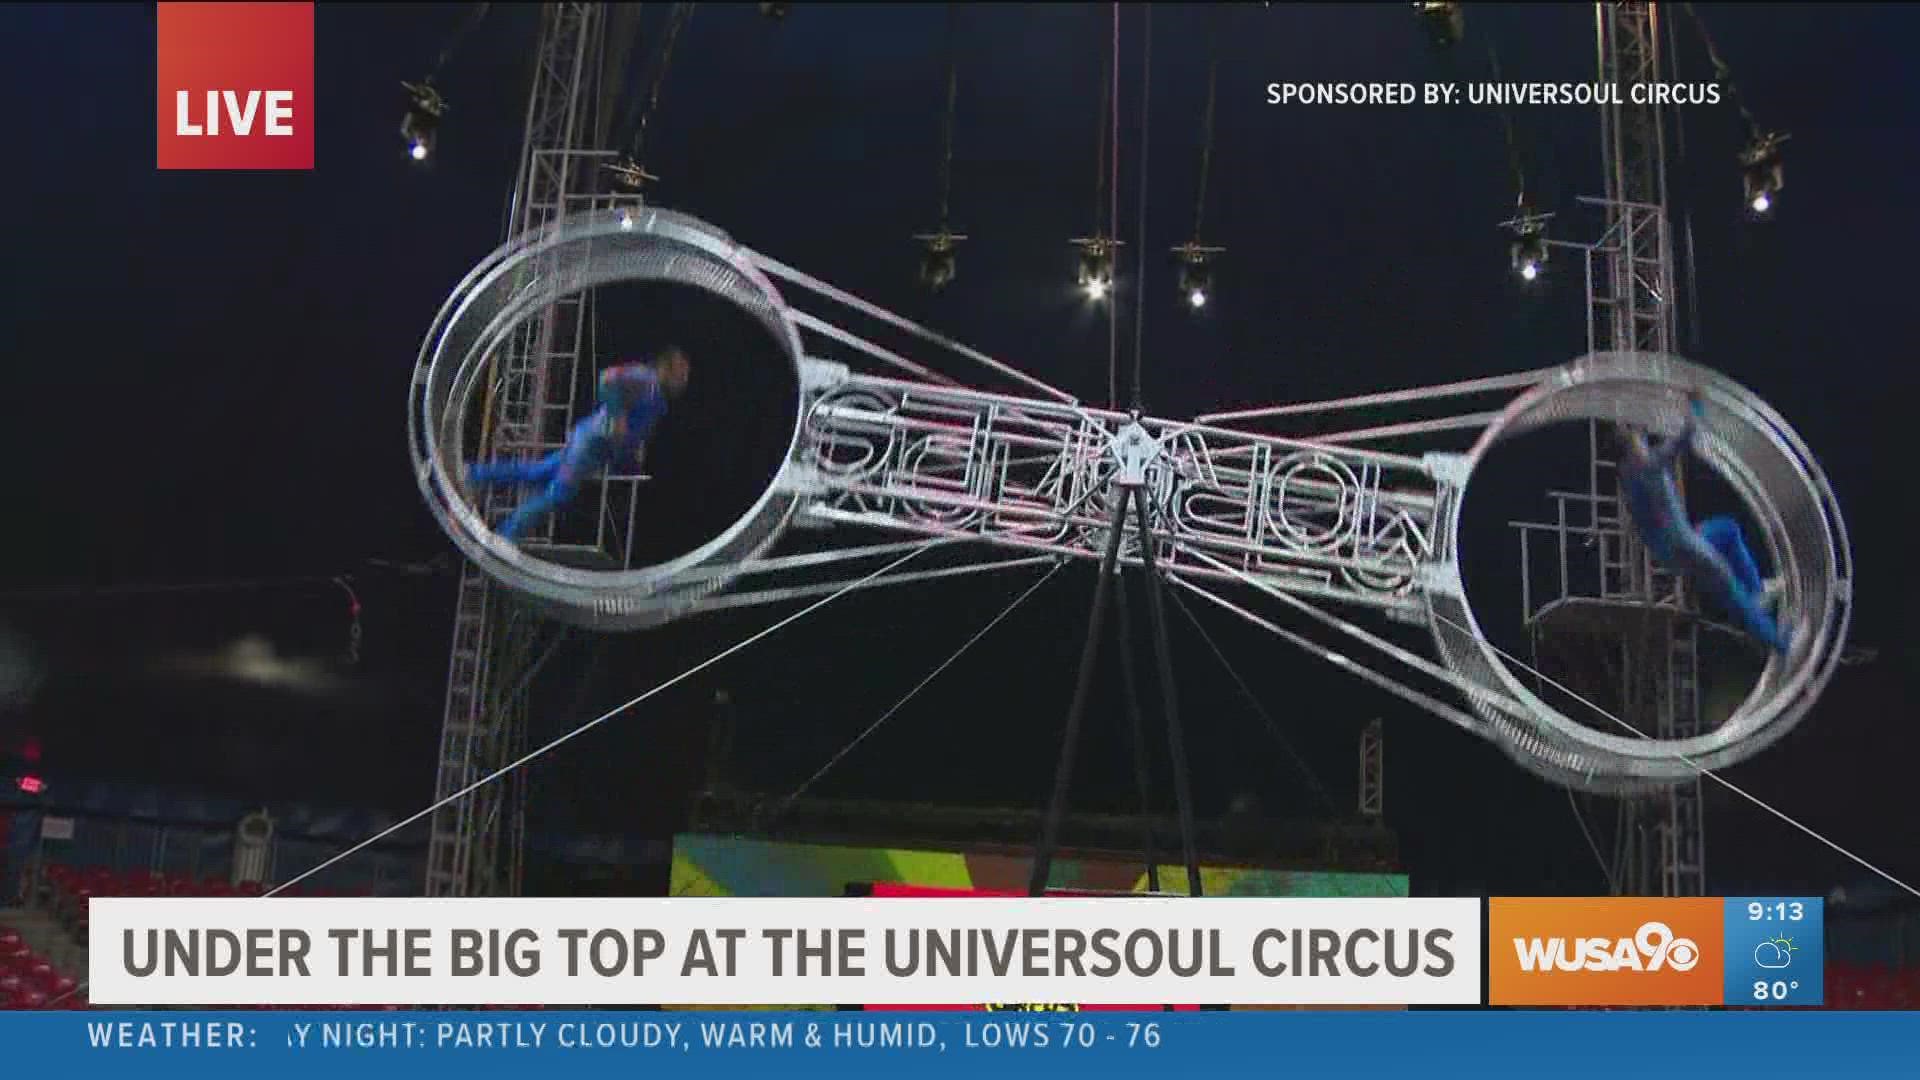 Sponsored by: UniverSoul Circus. Kristen gets a first look at UniverSoul Circus and shares what to expect at this summers' shows. For tickets: UniverSoulCircus.com